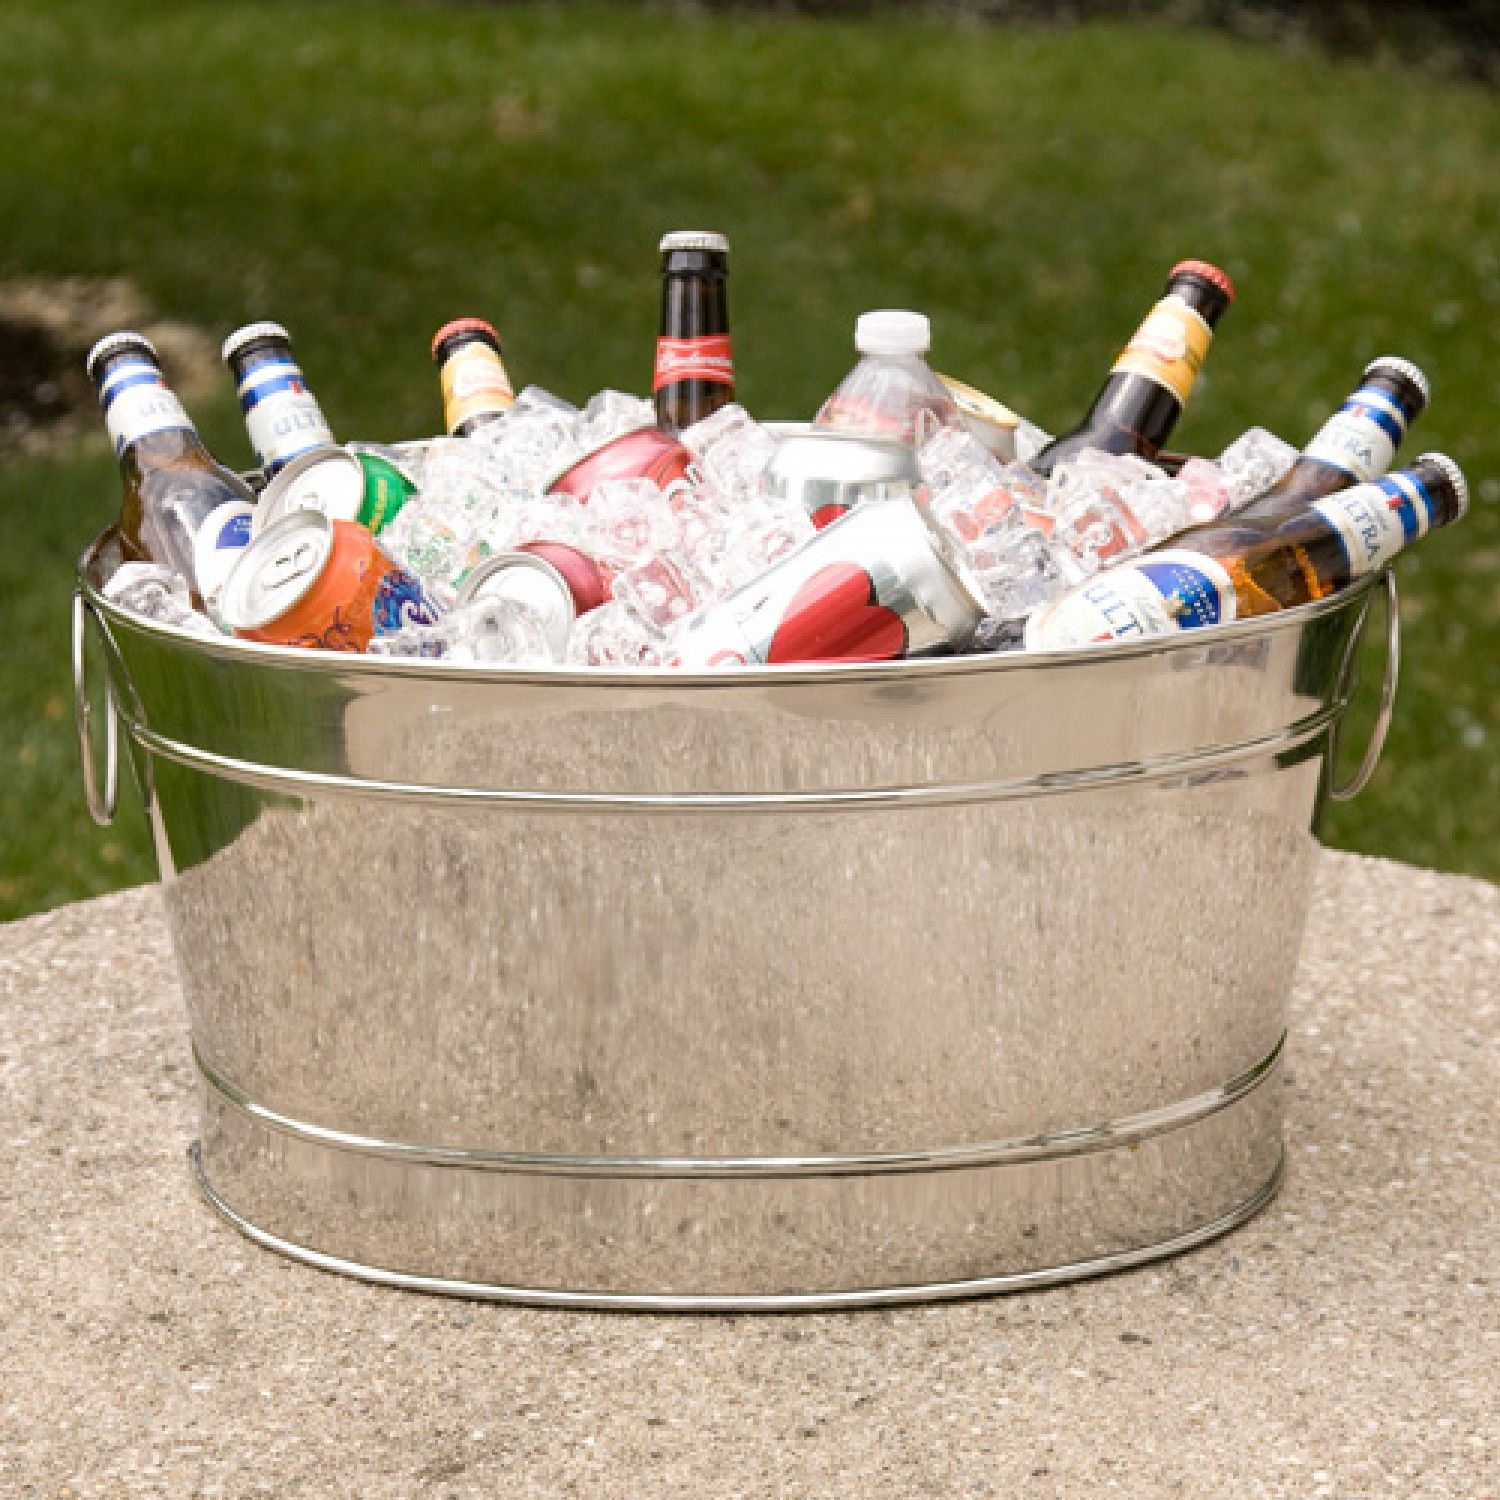 Large metal tubs for drinks